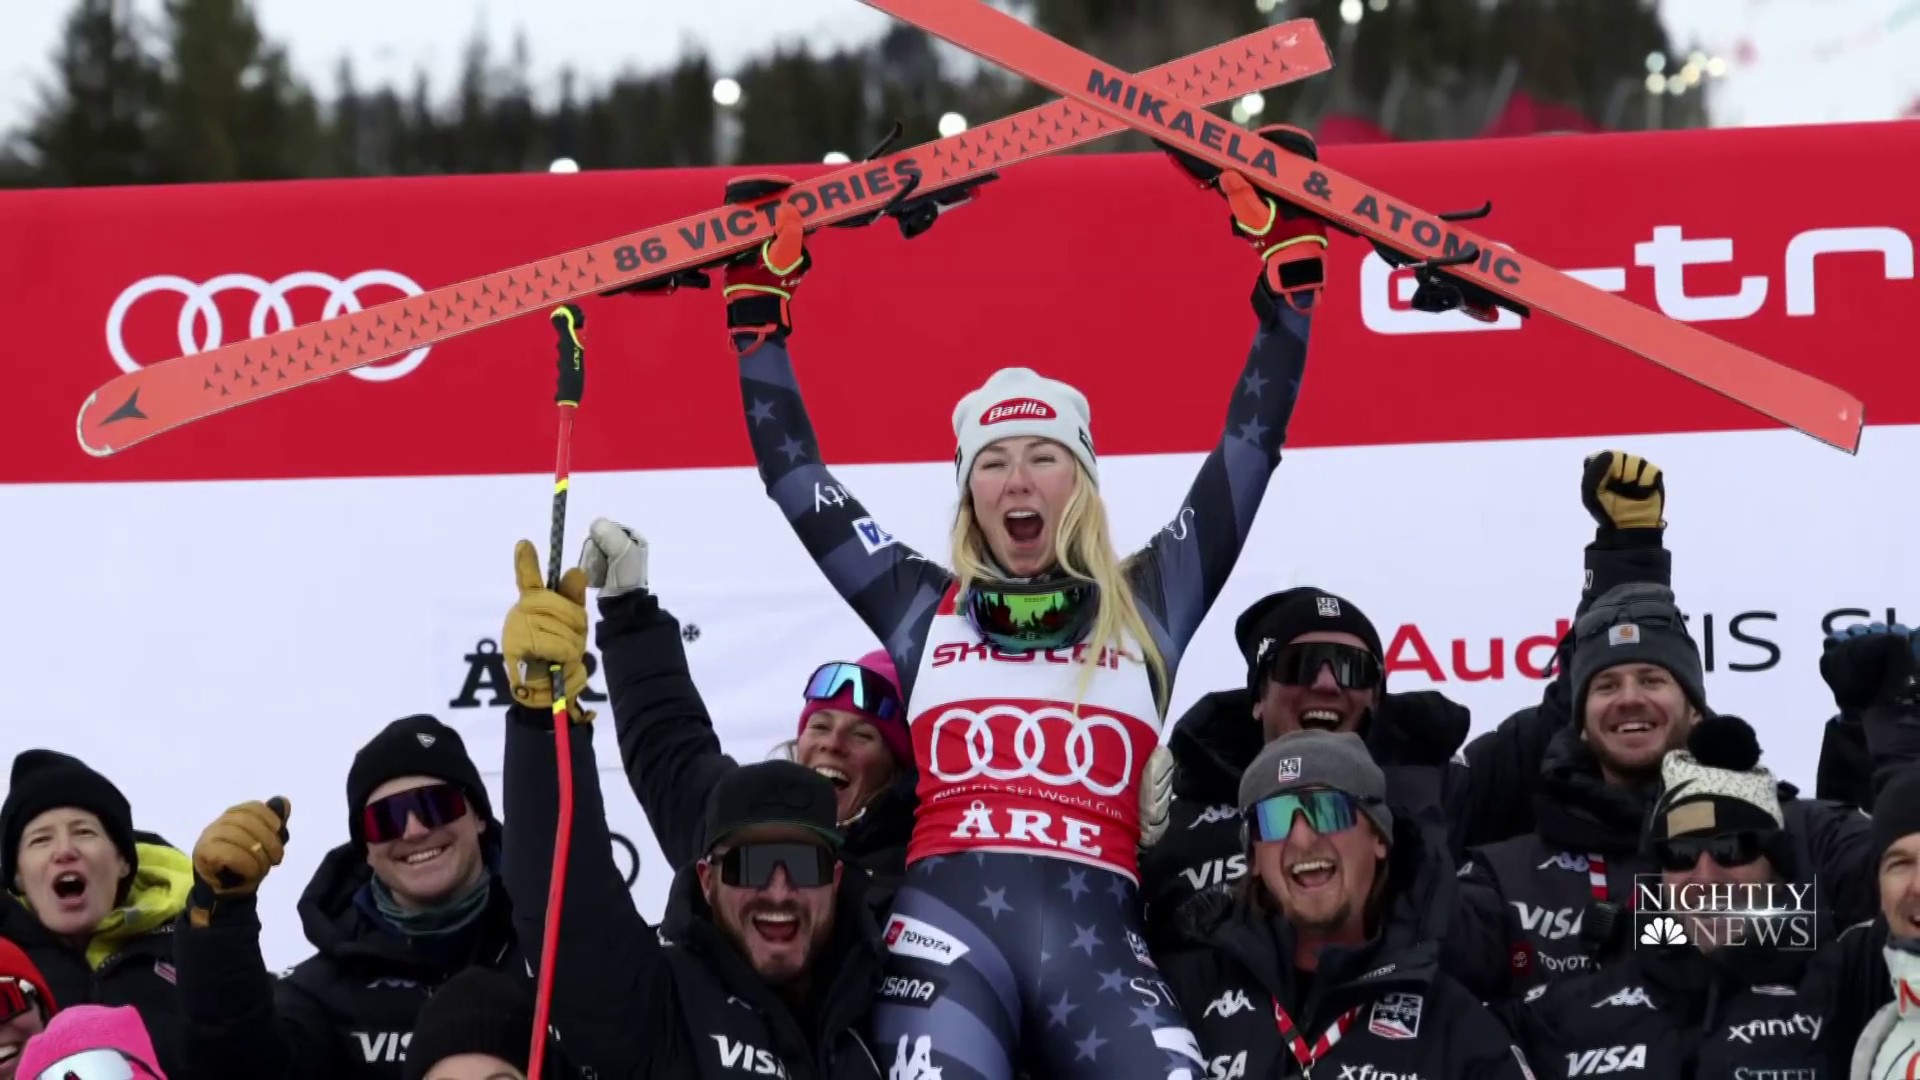 Mikaela Shiffrin ties Alpine skiing World Cup win record with 86th victory